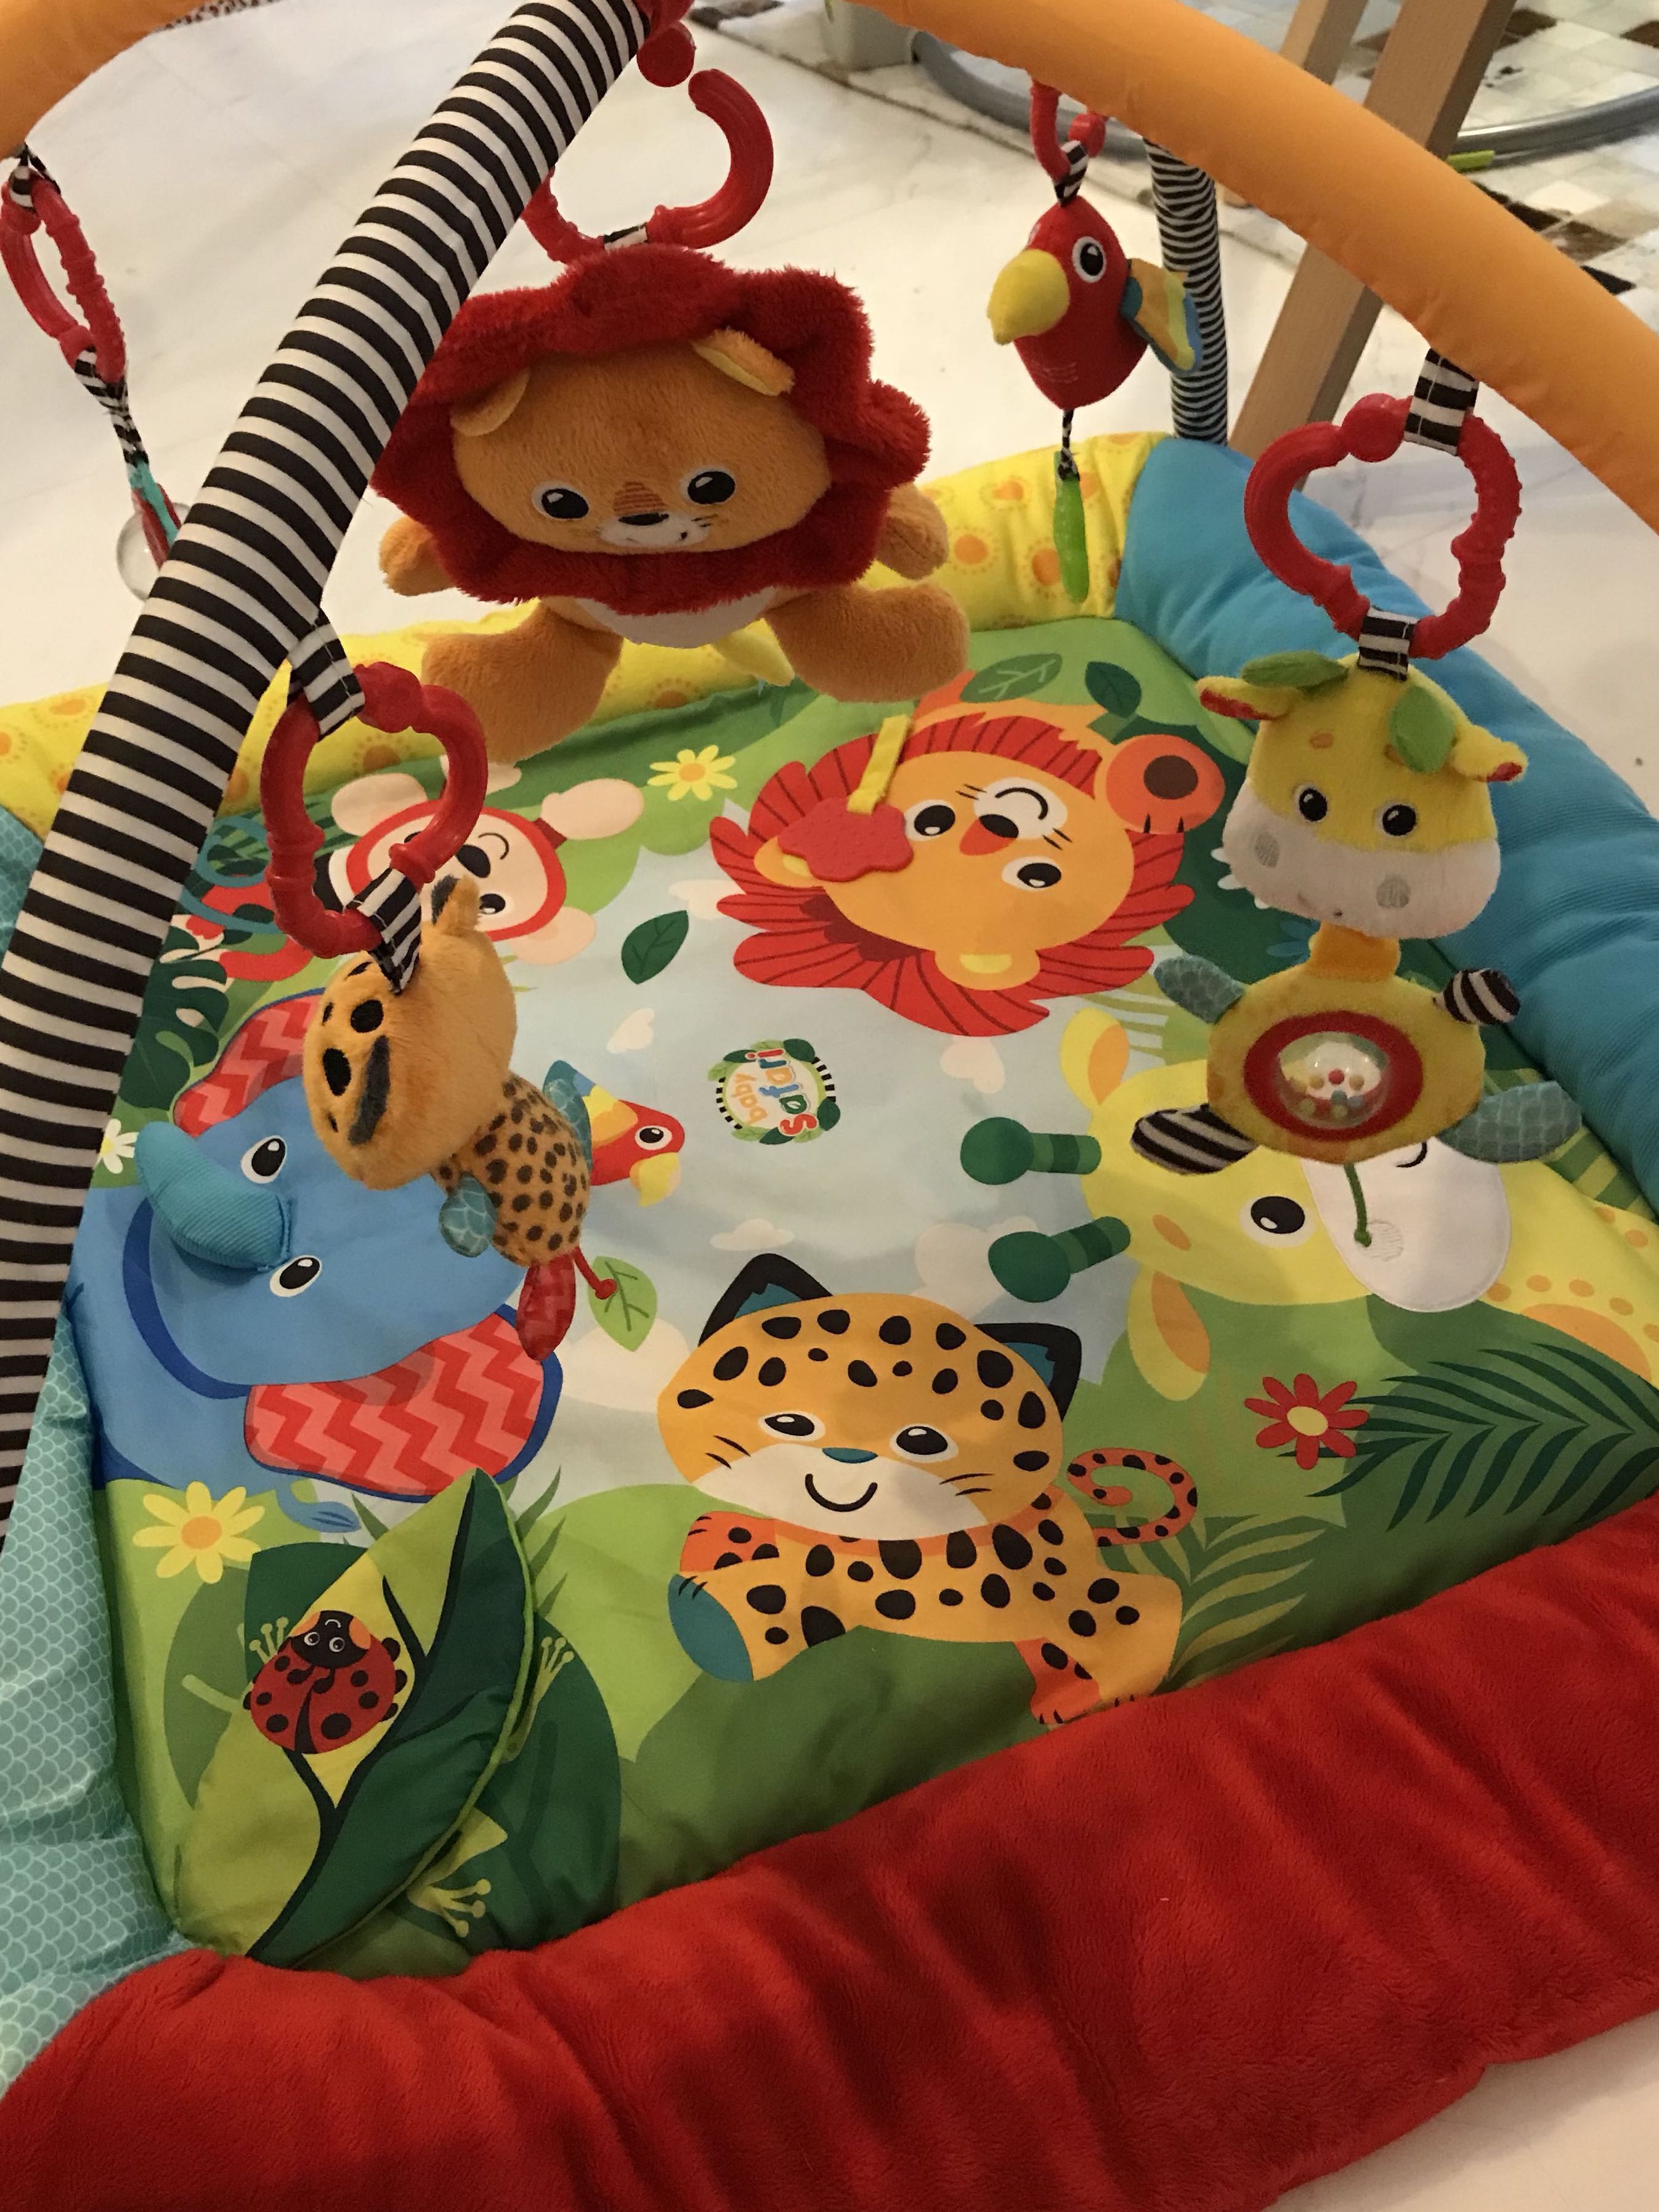 play mat baby mothercare